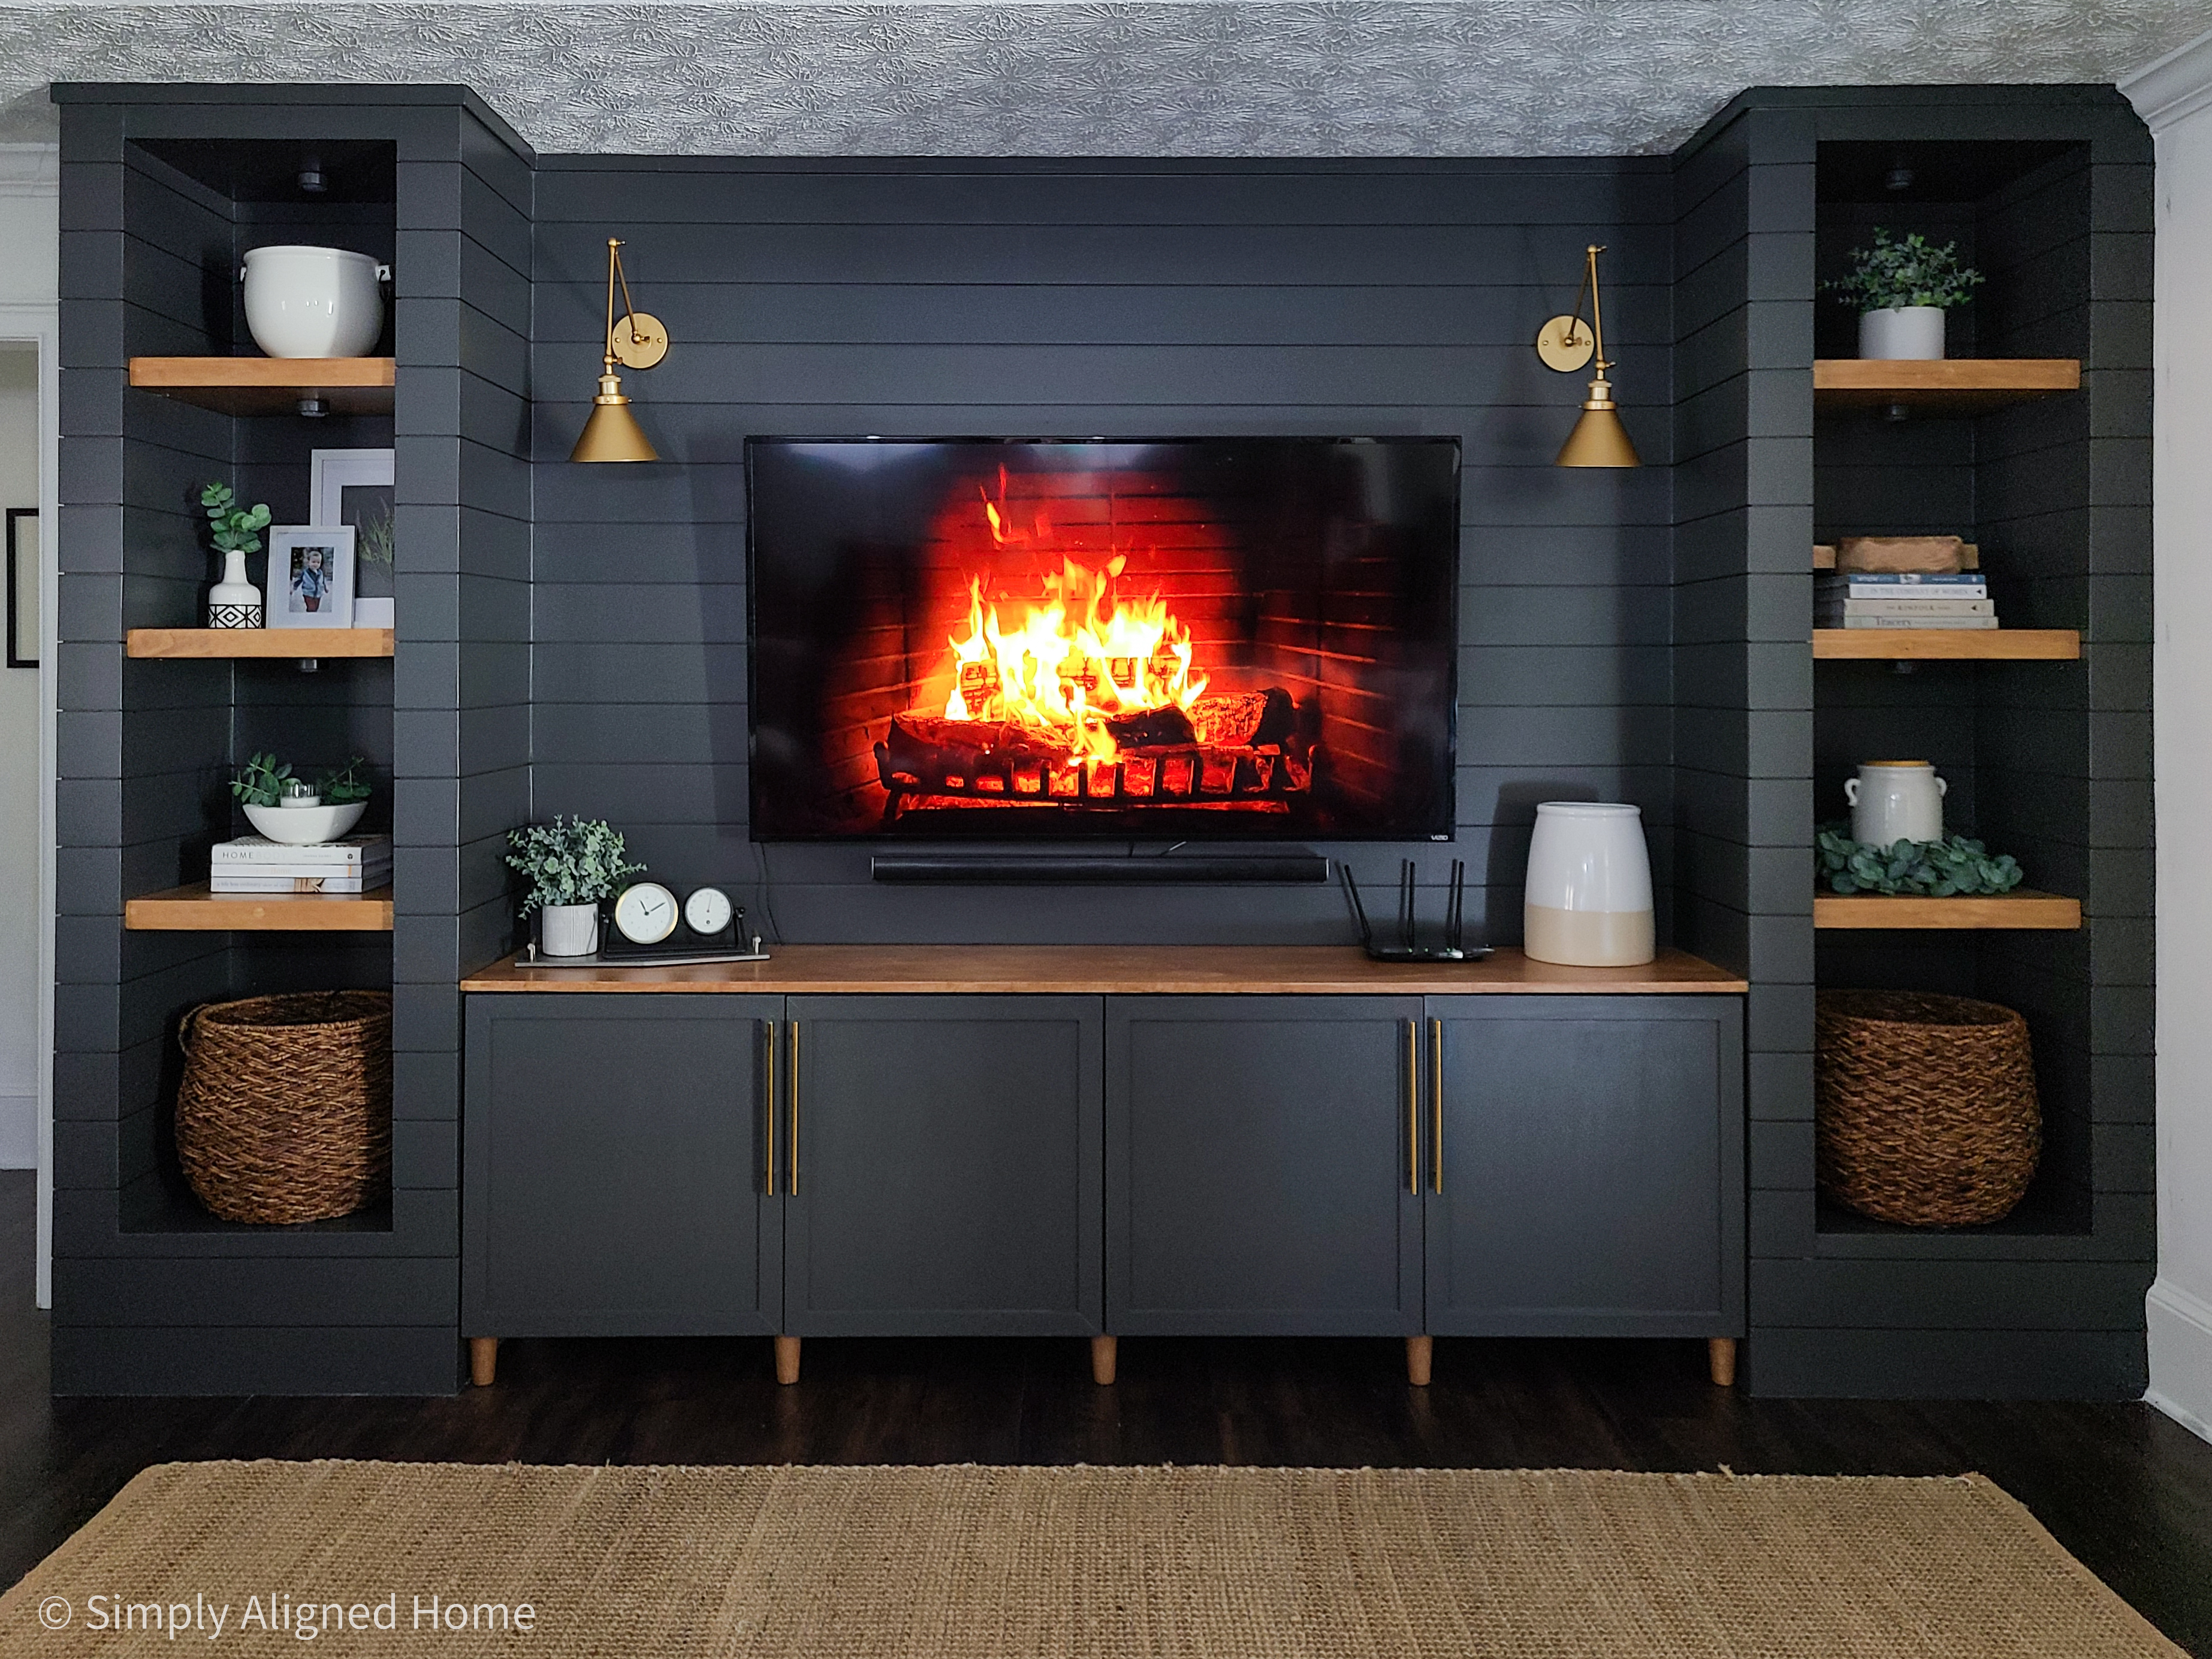 https://simplyalignedhome.com/wp-content/uploads/2021/01/Shiplap-built-in-unit-with-Iron-Ore-IKEA-BESTA-stained-wood-shelves.jpg